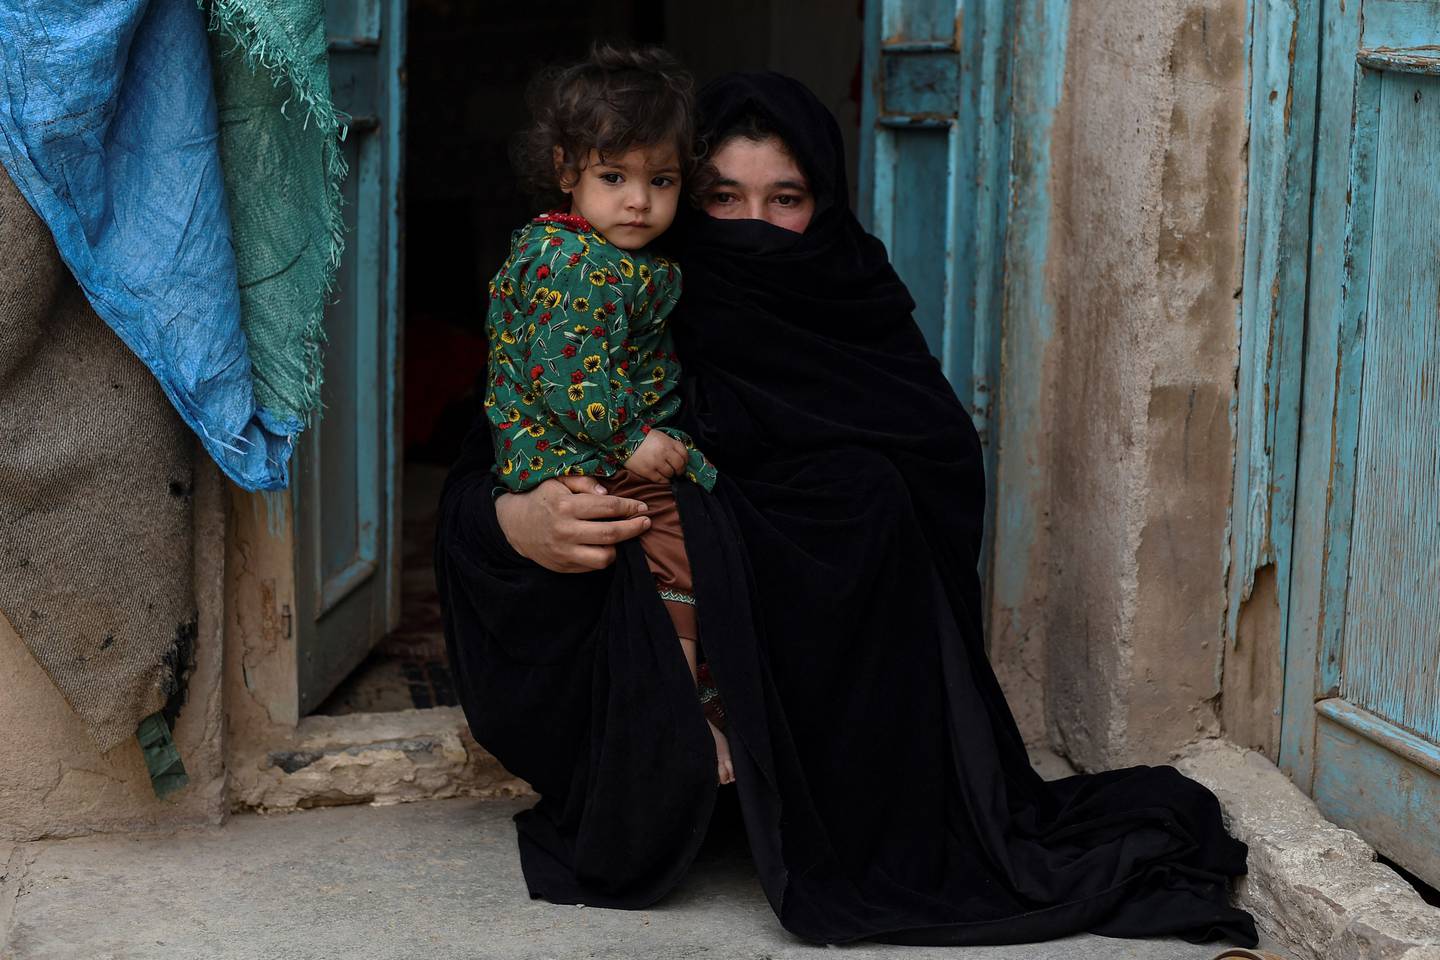 Female-headed households in Afghanistan struggle much more than male-headed ones. AFP